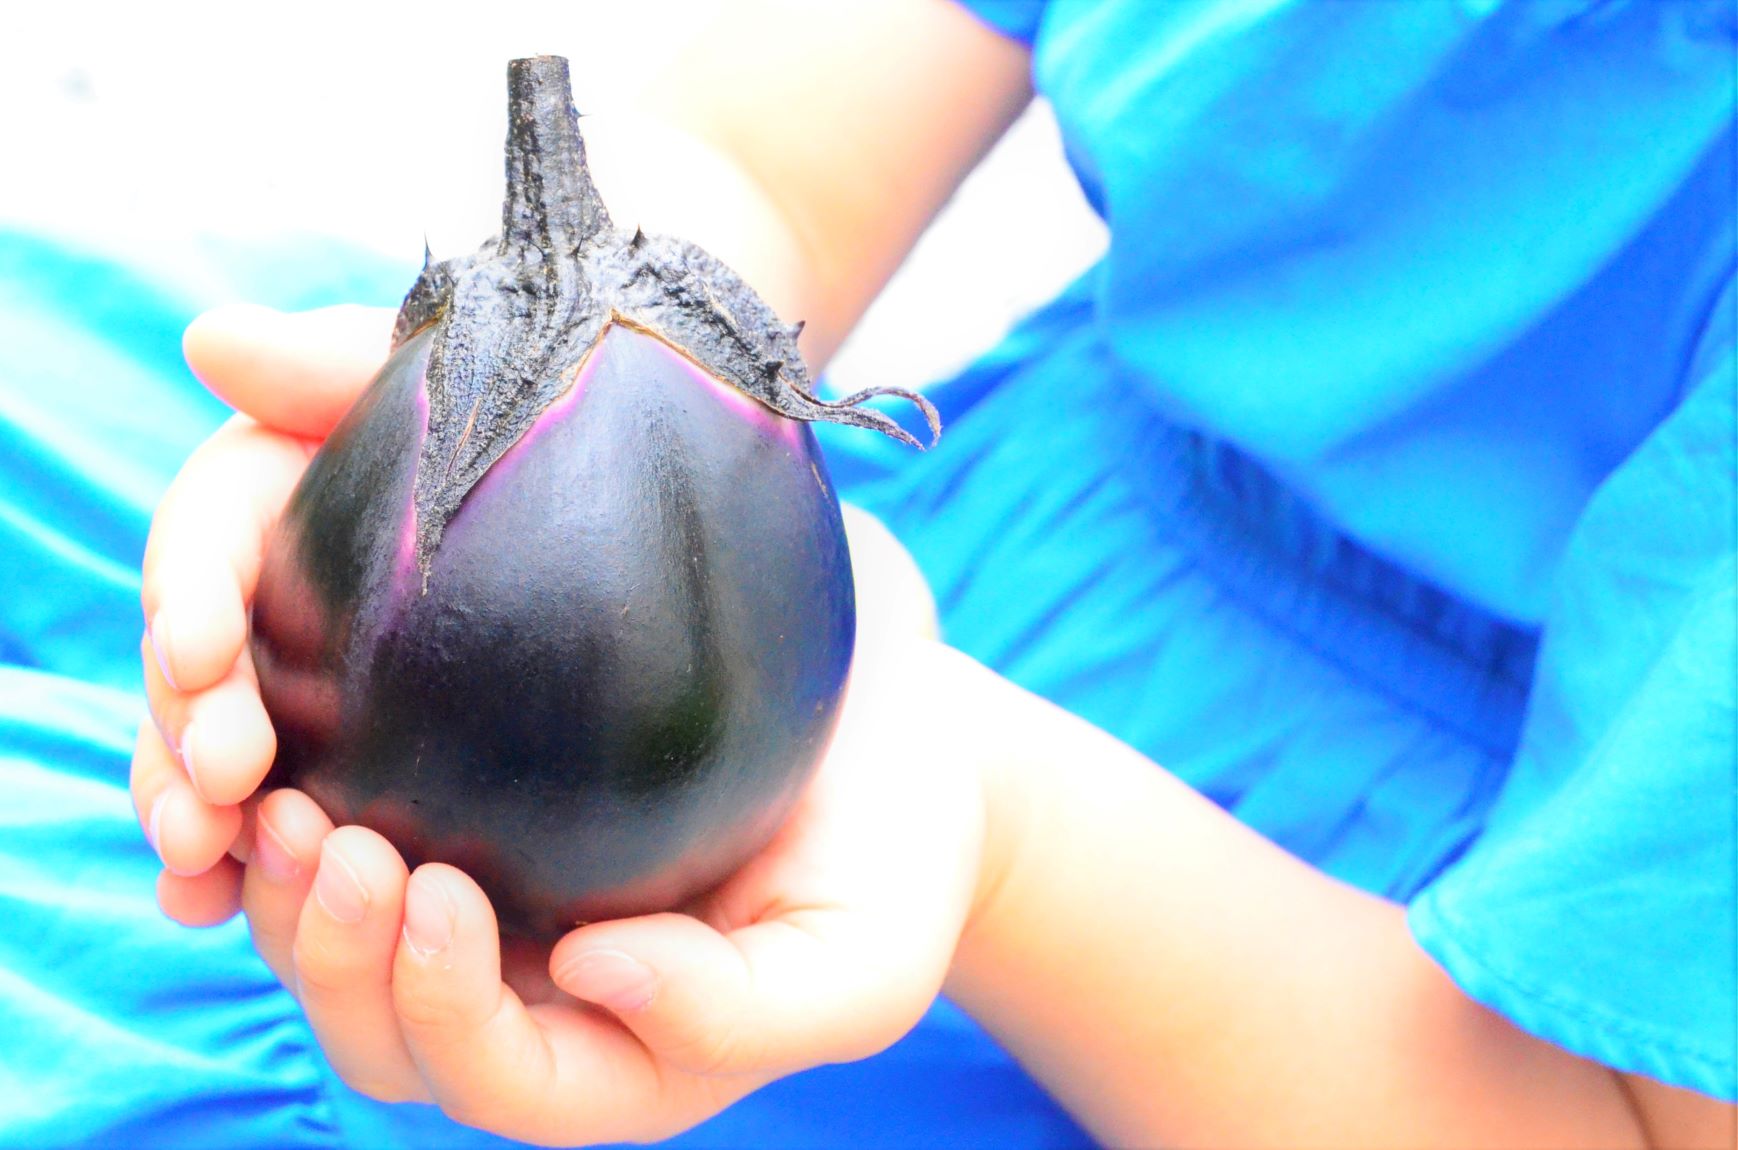 Congrats! The long-awaited harvest of eggplant